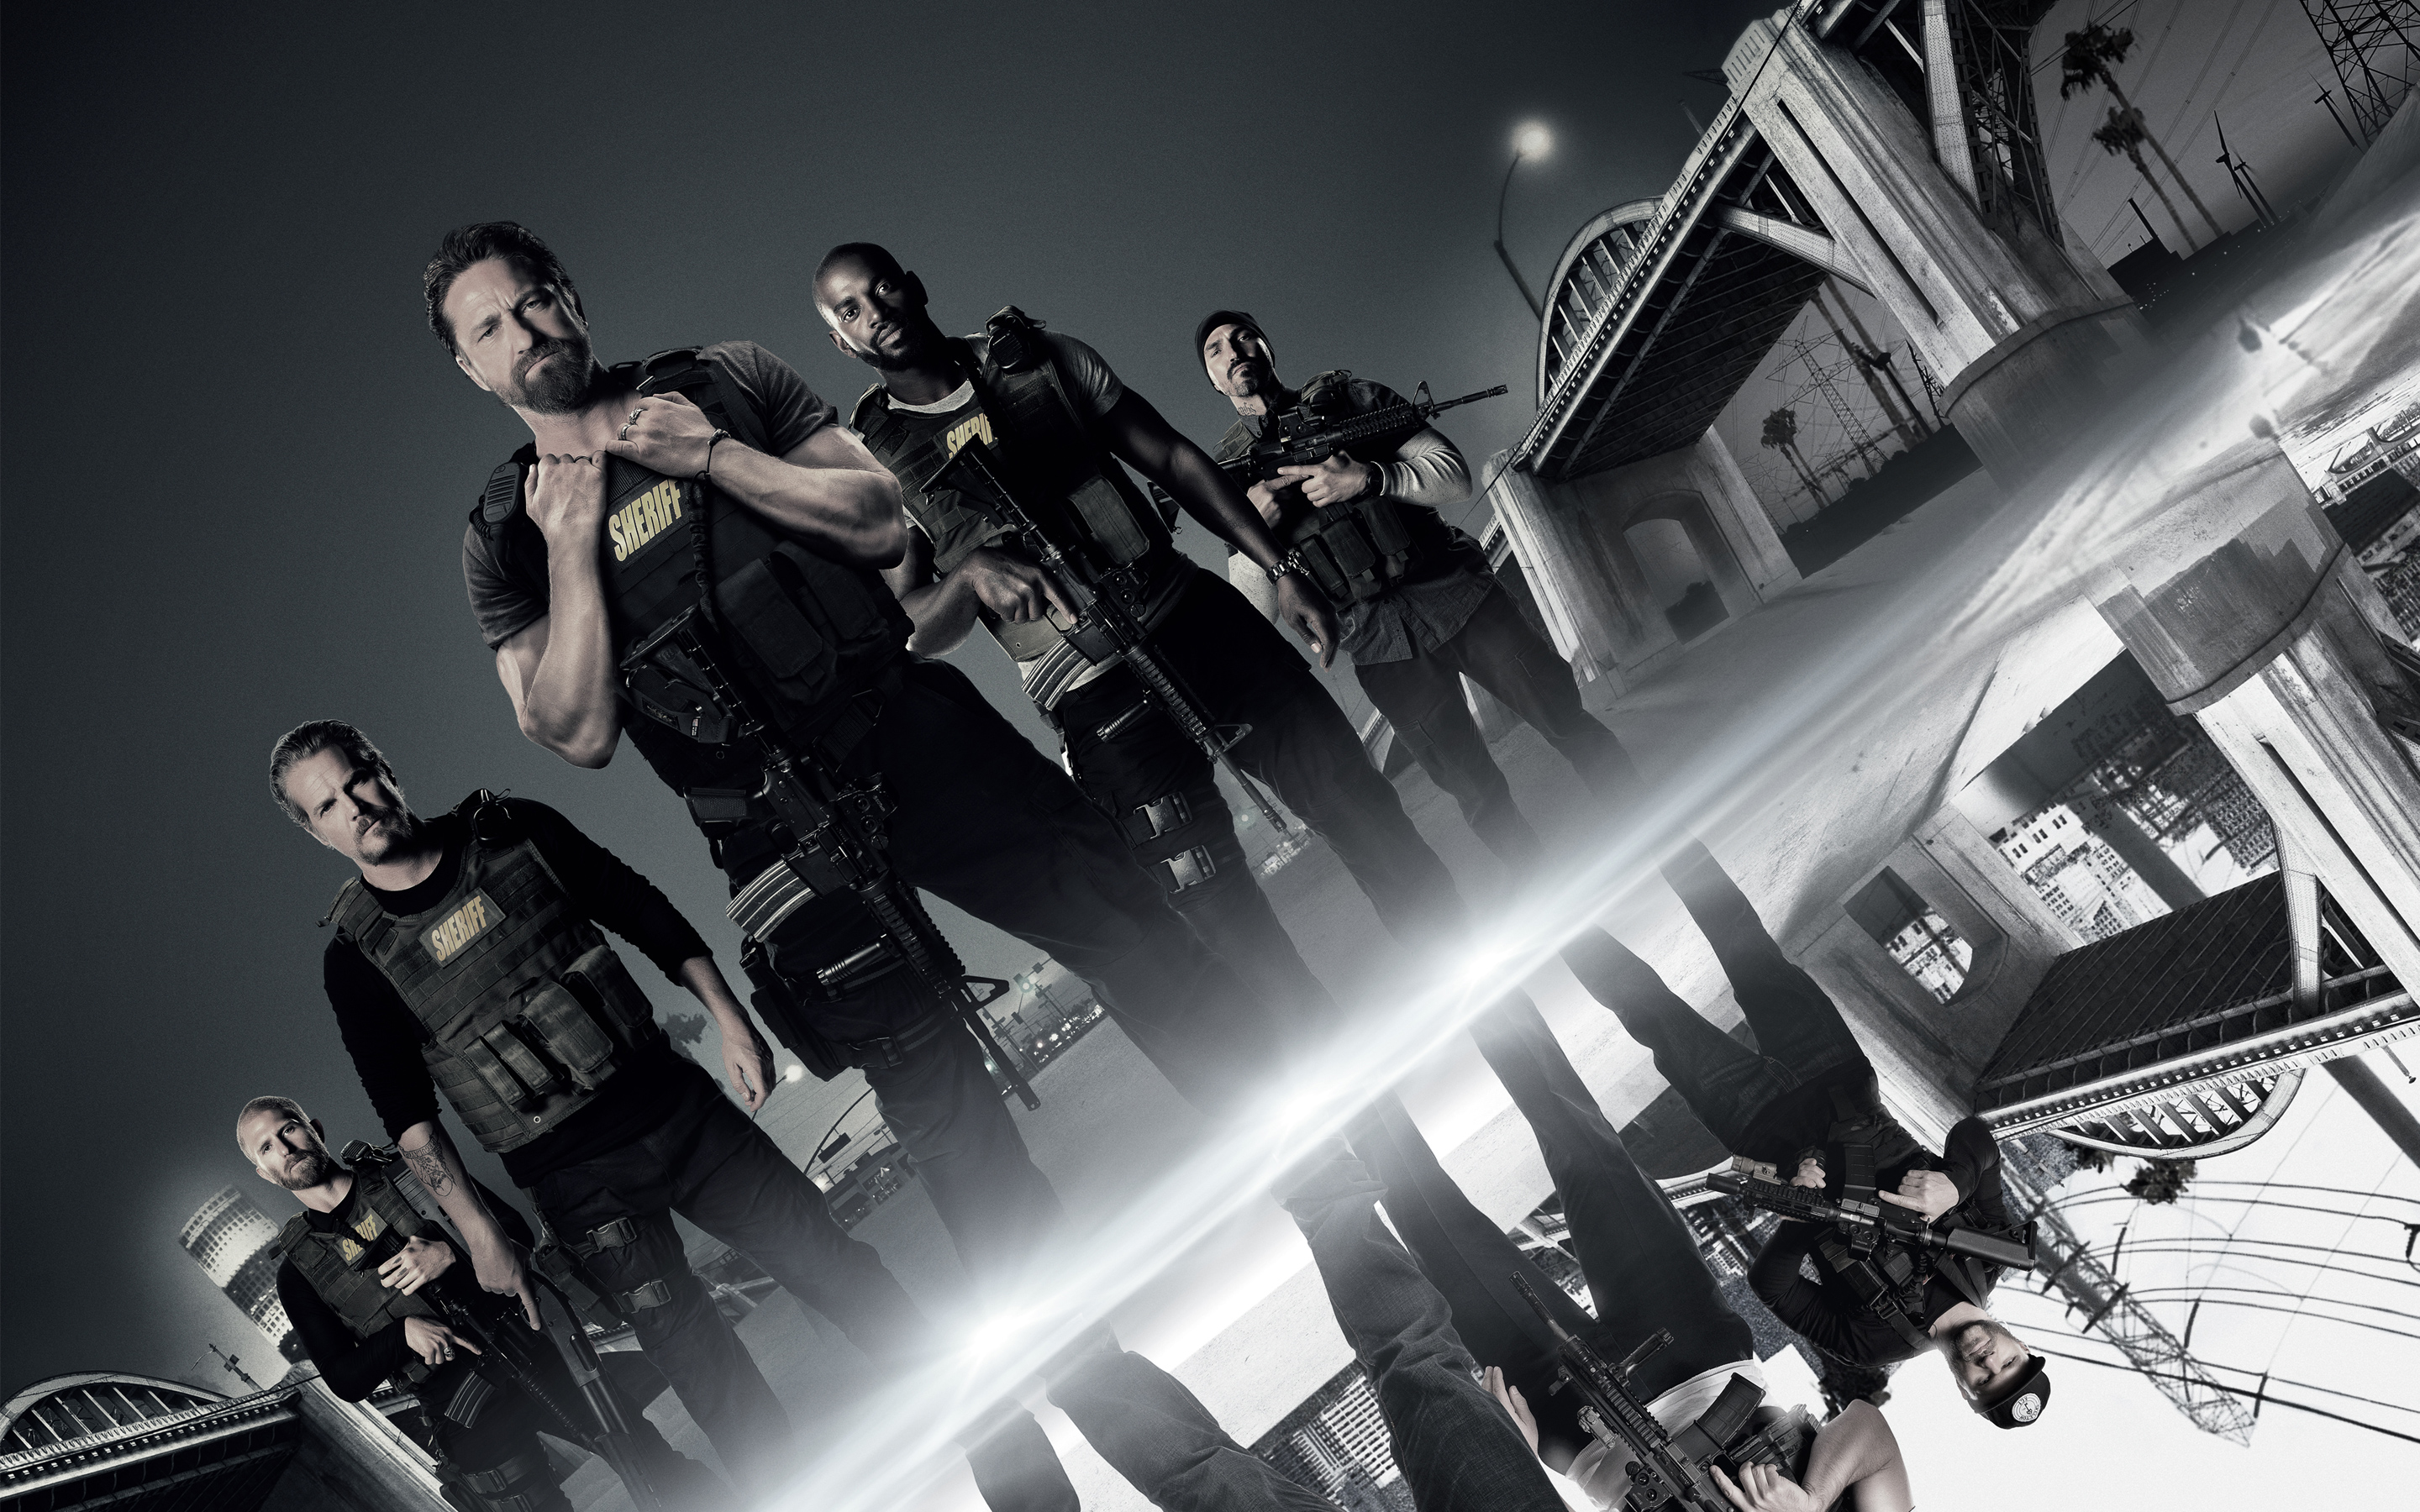 Den of Thieves 2018 4K Wallpapers